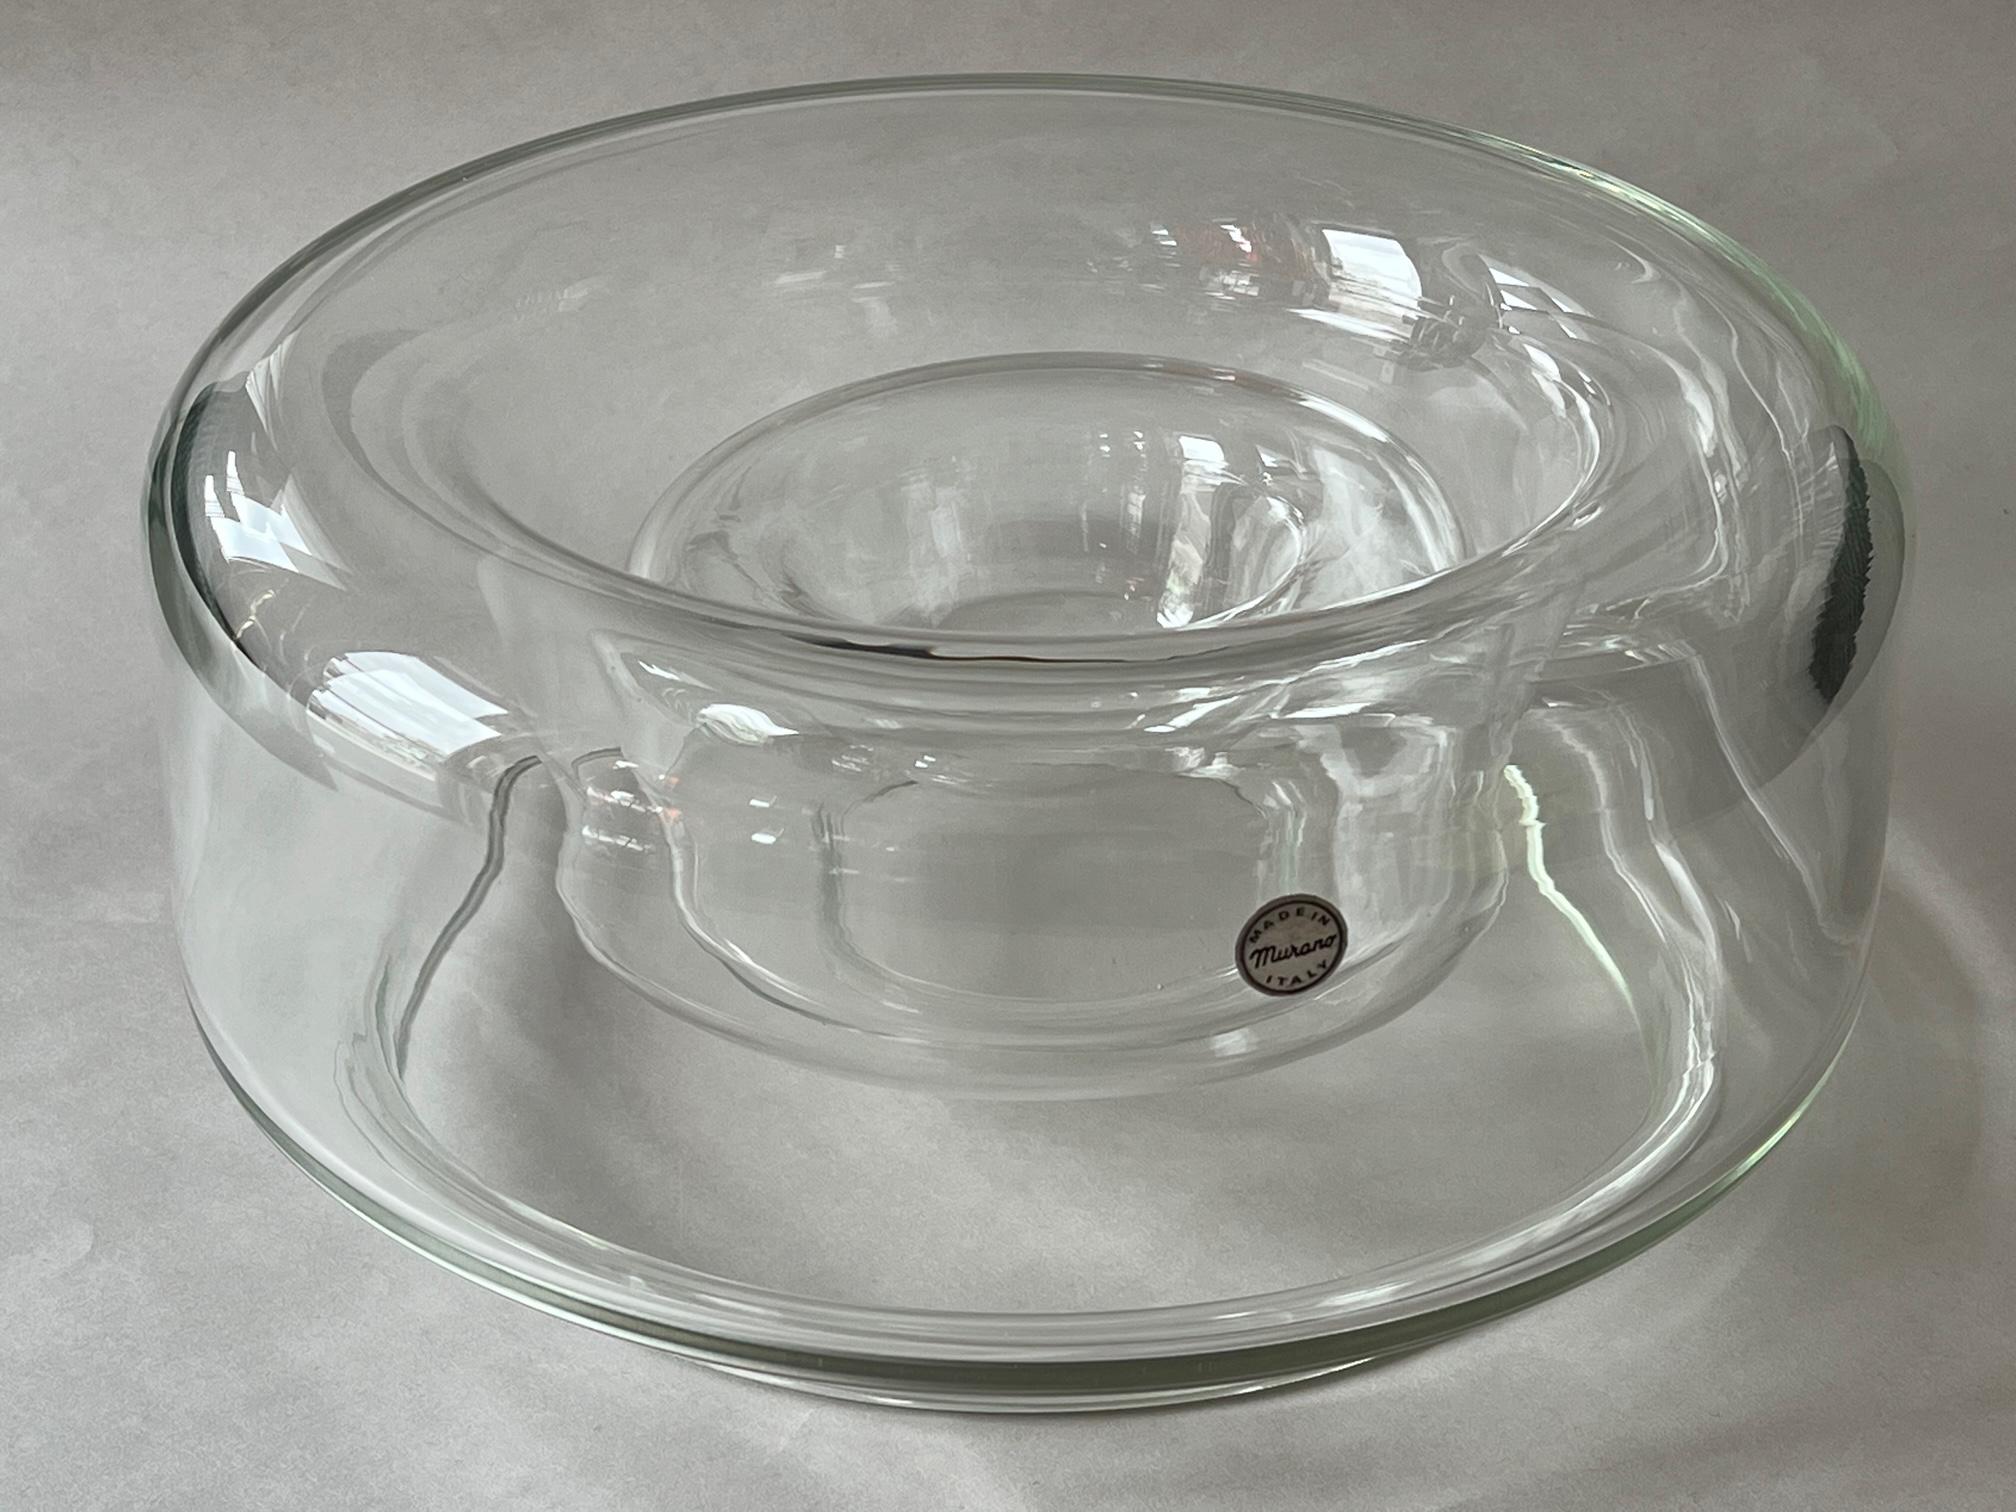 Two nesting clear glass bowls made in Murano Italy for Knoll International and designed by Charles Pfister, ca' 1970's. The large one is approx. 11.5